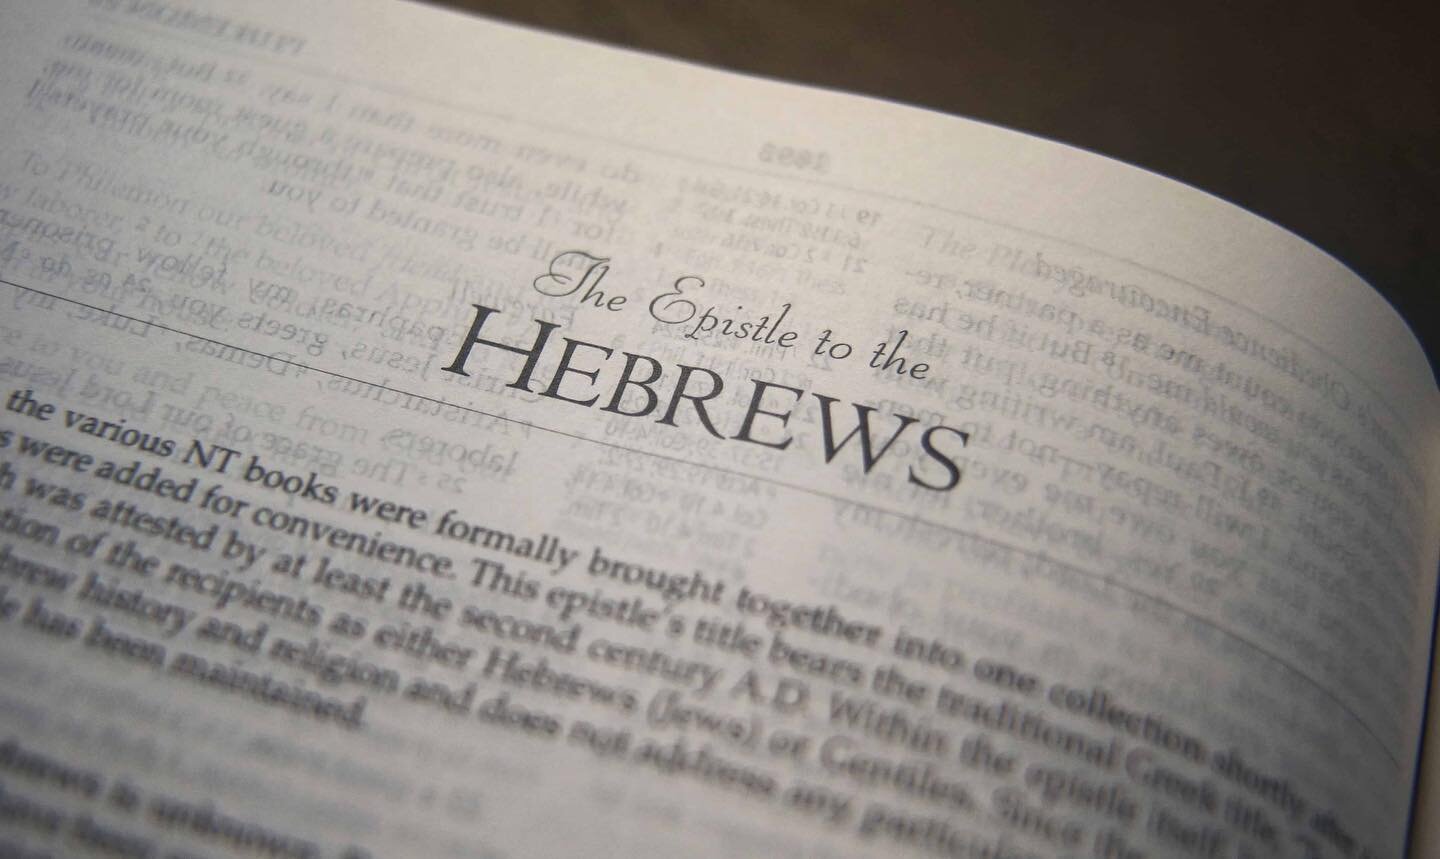 Look forward to seeing you all tonight as we begin to dive into Hebrews! The Zoom link is in the GroupMe!! See you at 7 pm!!